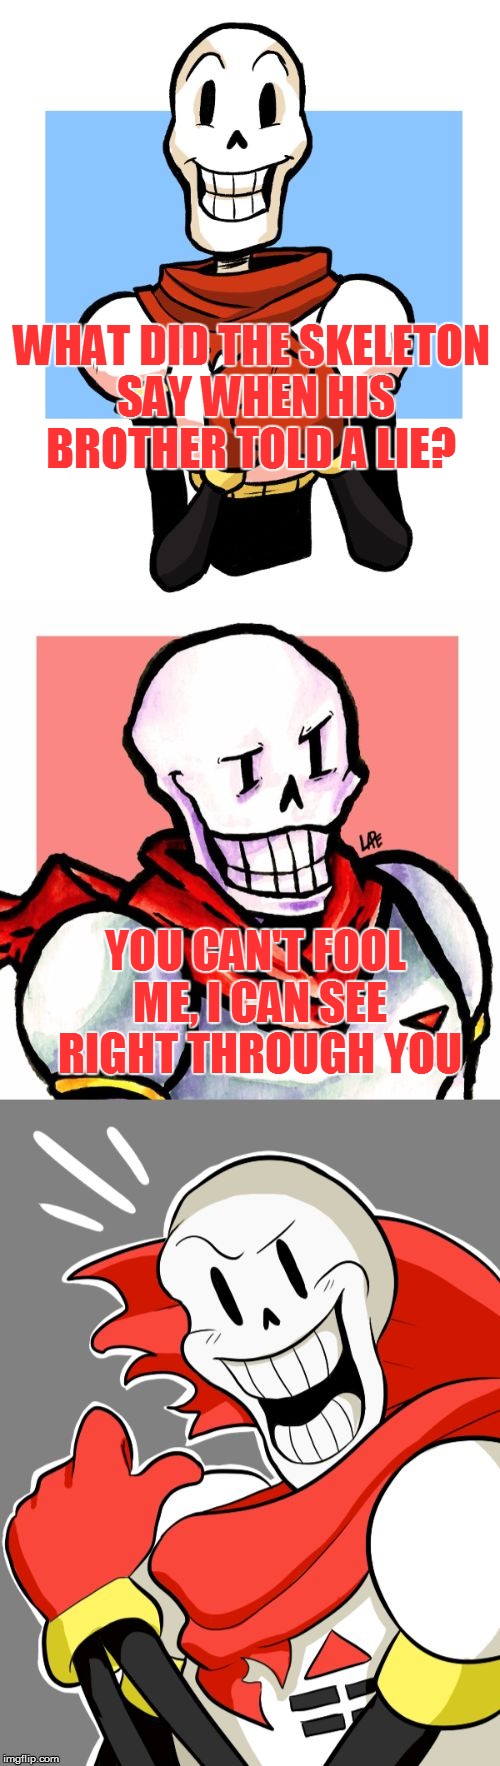 template from "Juicydeath1025" bad pun papyrus | WHAT DID THE SKELETON SAY WHEN HIS BROTHER TOLD A LIE? YOU CAN'T FOOL ME, I CAN SEE RIGHT THROUGH YOU | image tagged in bad pun papyrus,undertale,memes,skeletons,puns | made w/ Imgflip meme maker